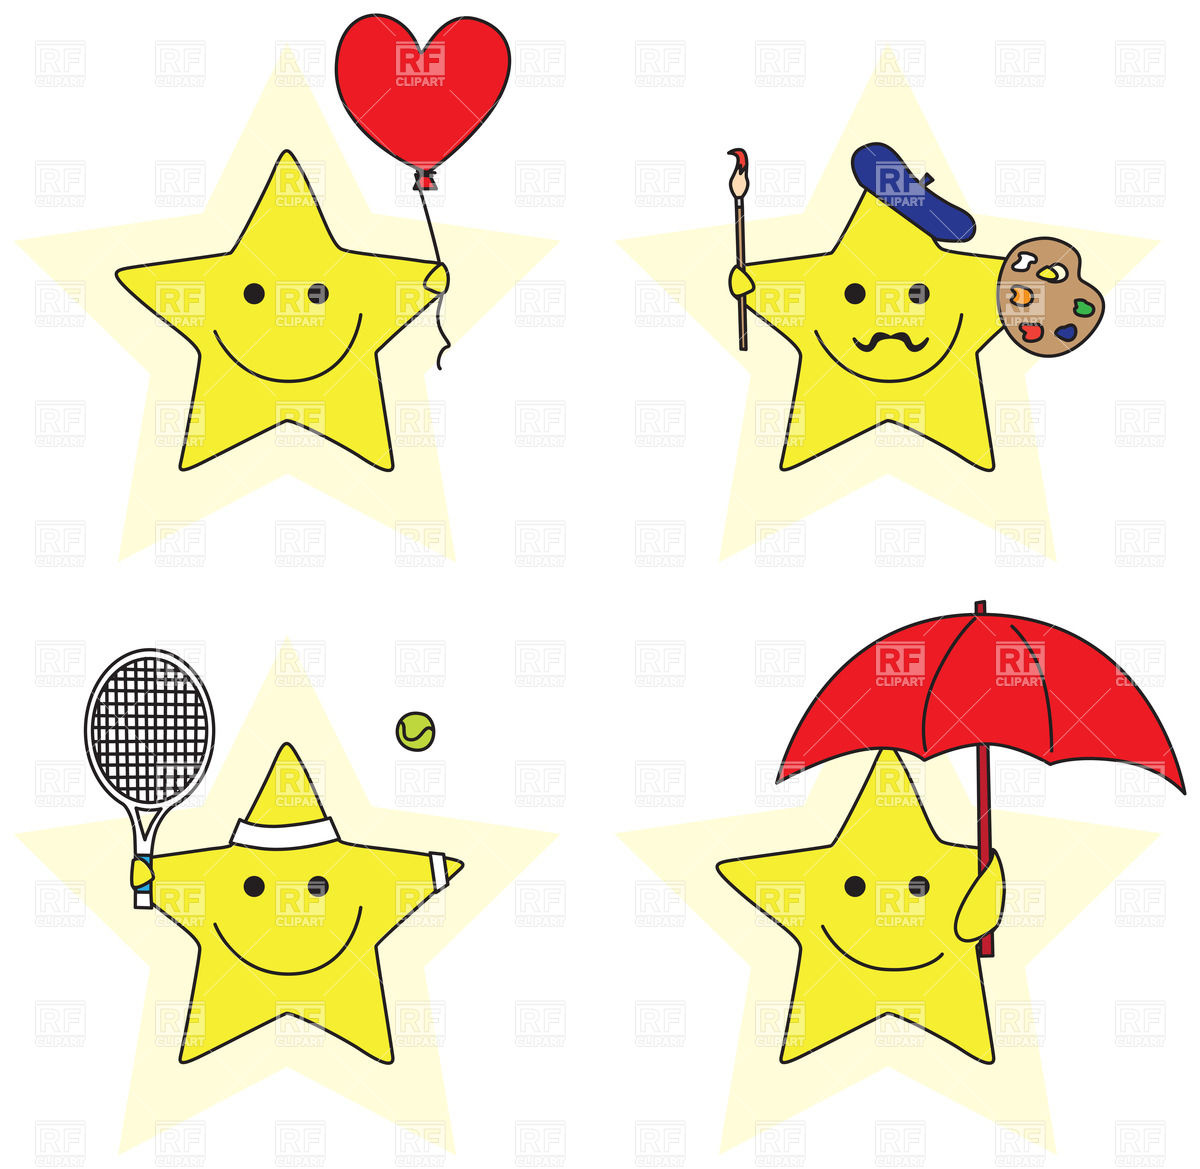 Funny Cartoon Stars With Faces   Painter Tennis Player Smiley With    